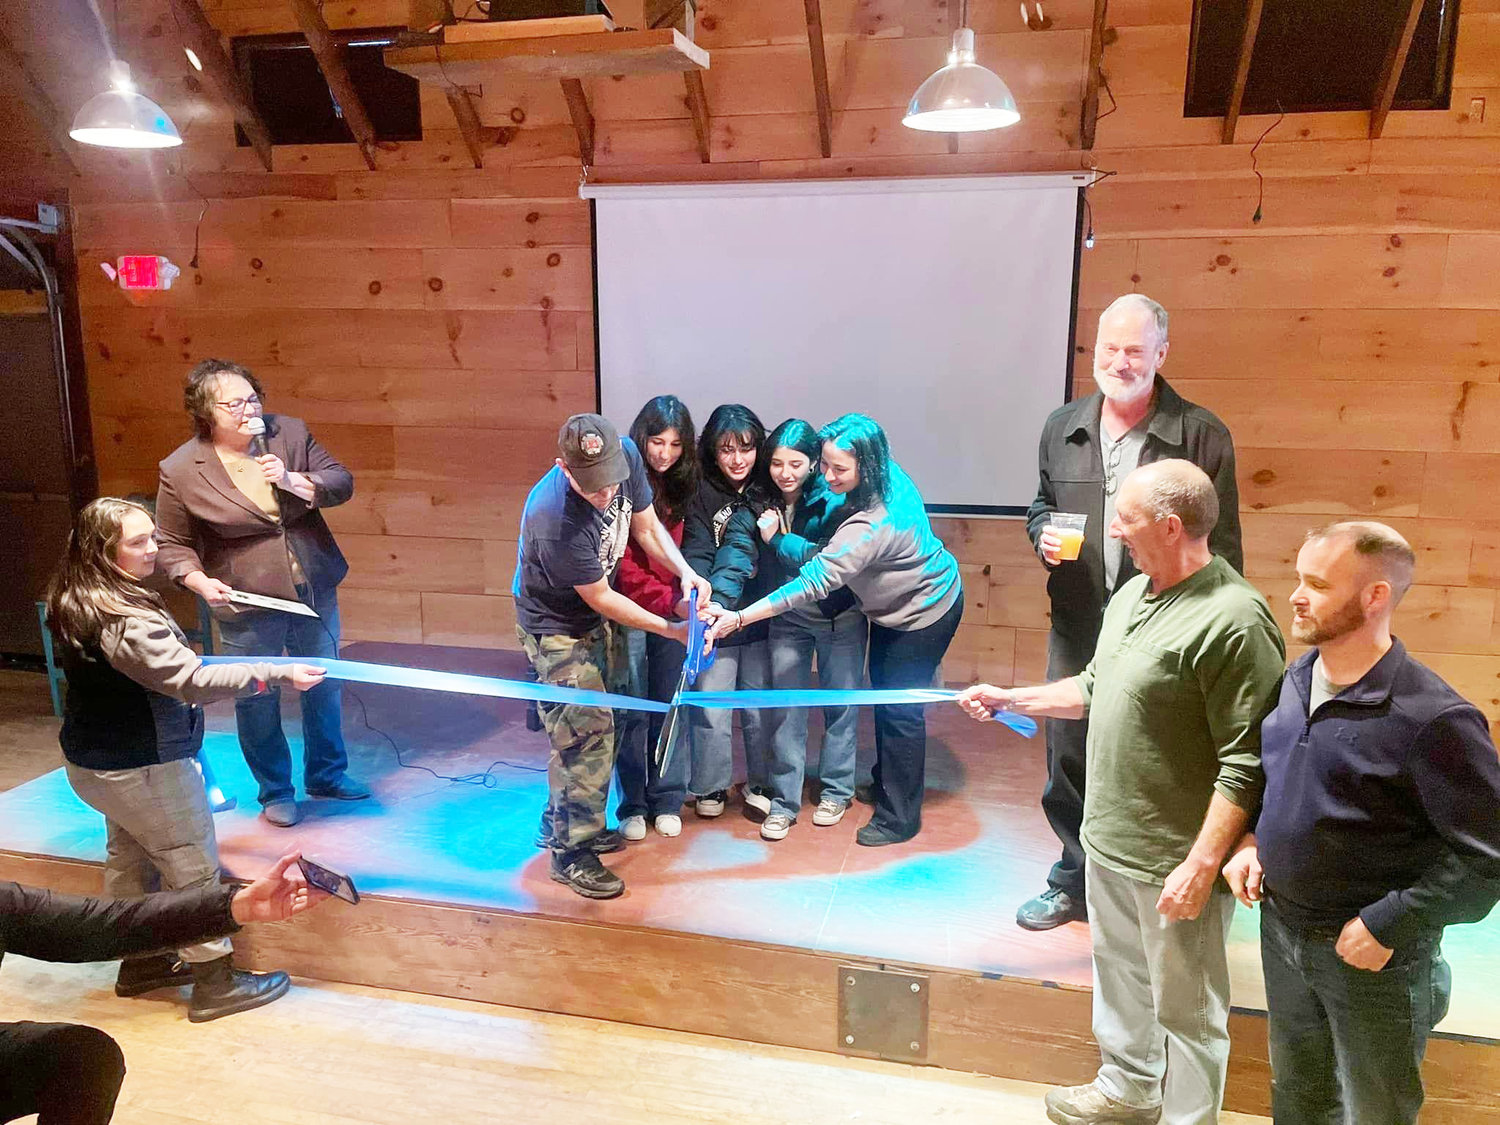 Cutting the ribbon is Bridge and Tunnel Brewery owner Rich Castagna, his wife Lisa and daughters Mia, Hailey and Sammy.  To the left is Sullivan County Chamber of Commerce Ambassador Shayna Benskie (holding ribbon) and President/CEO Jaime Schmeiser. To the right, from left, is Town of Liberty Councilman Dean Farrand, Supervisor Frank DeMayo and Councilman Brian McPhillips.